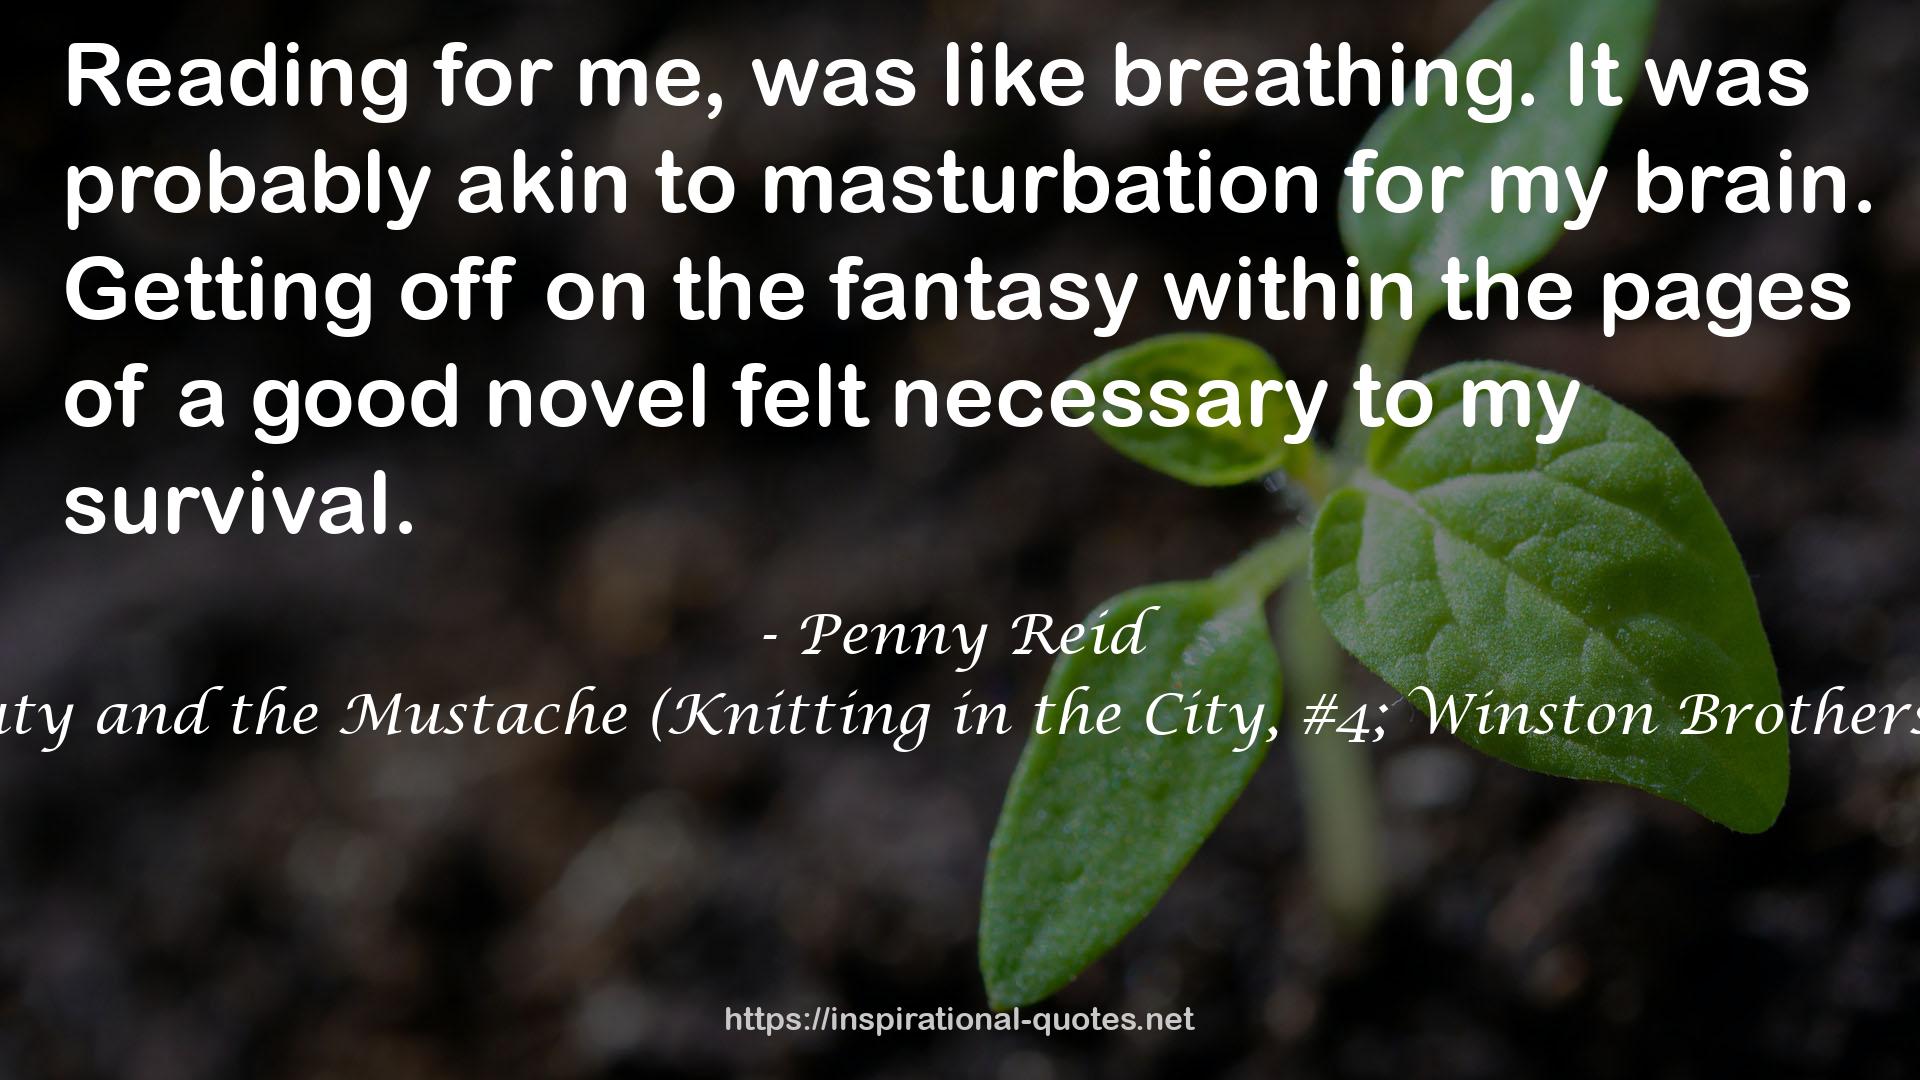 Beauty and the Mustache (Knitting in the City, #4; Winston Brothers, #0) QUOTES